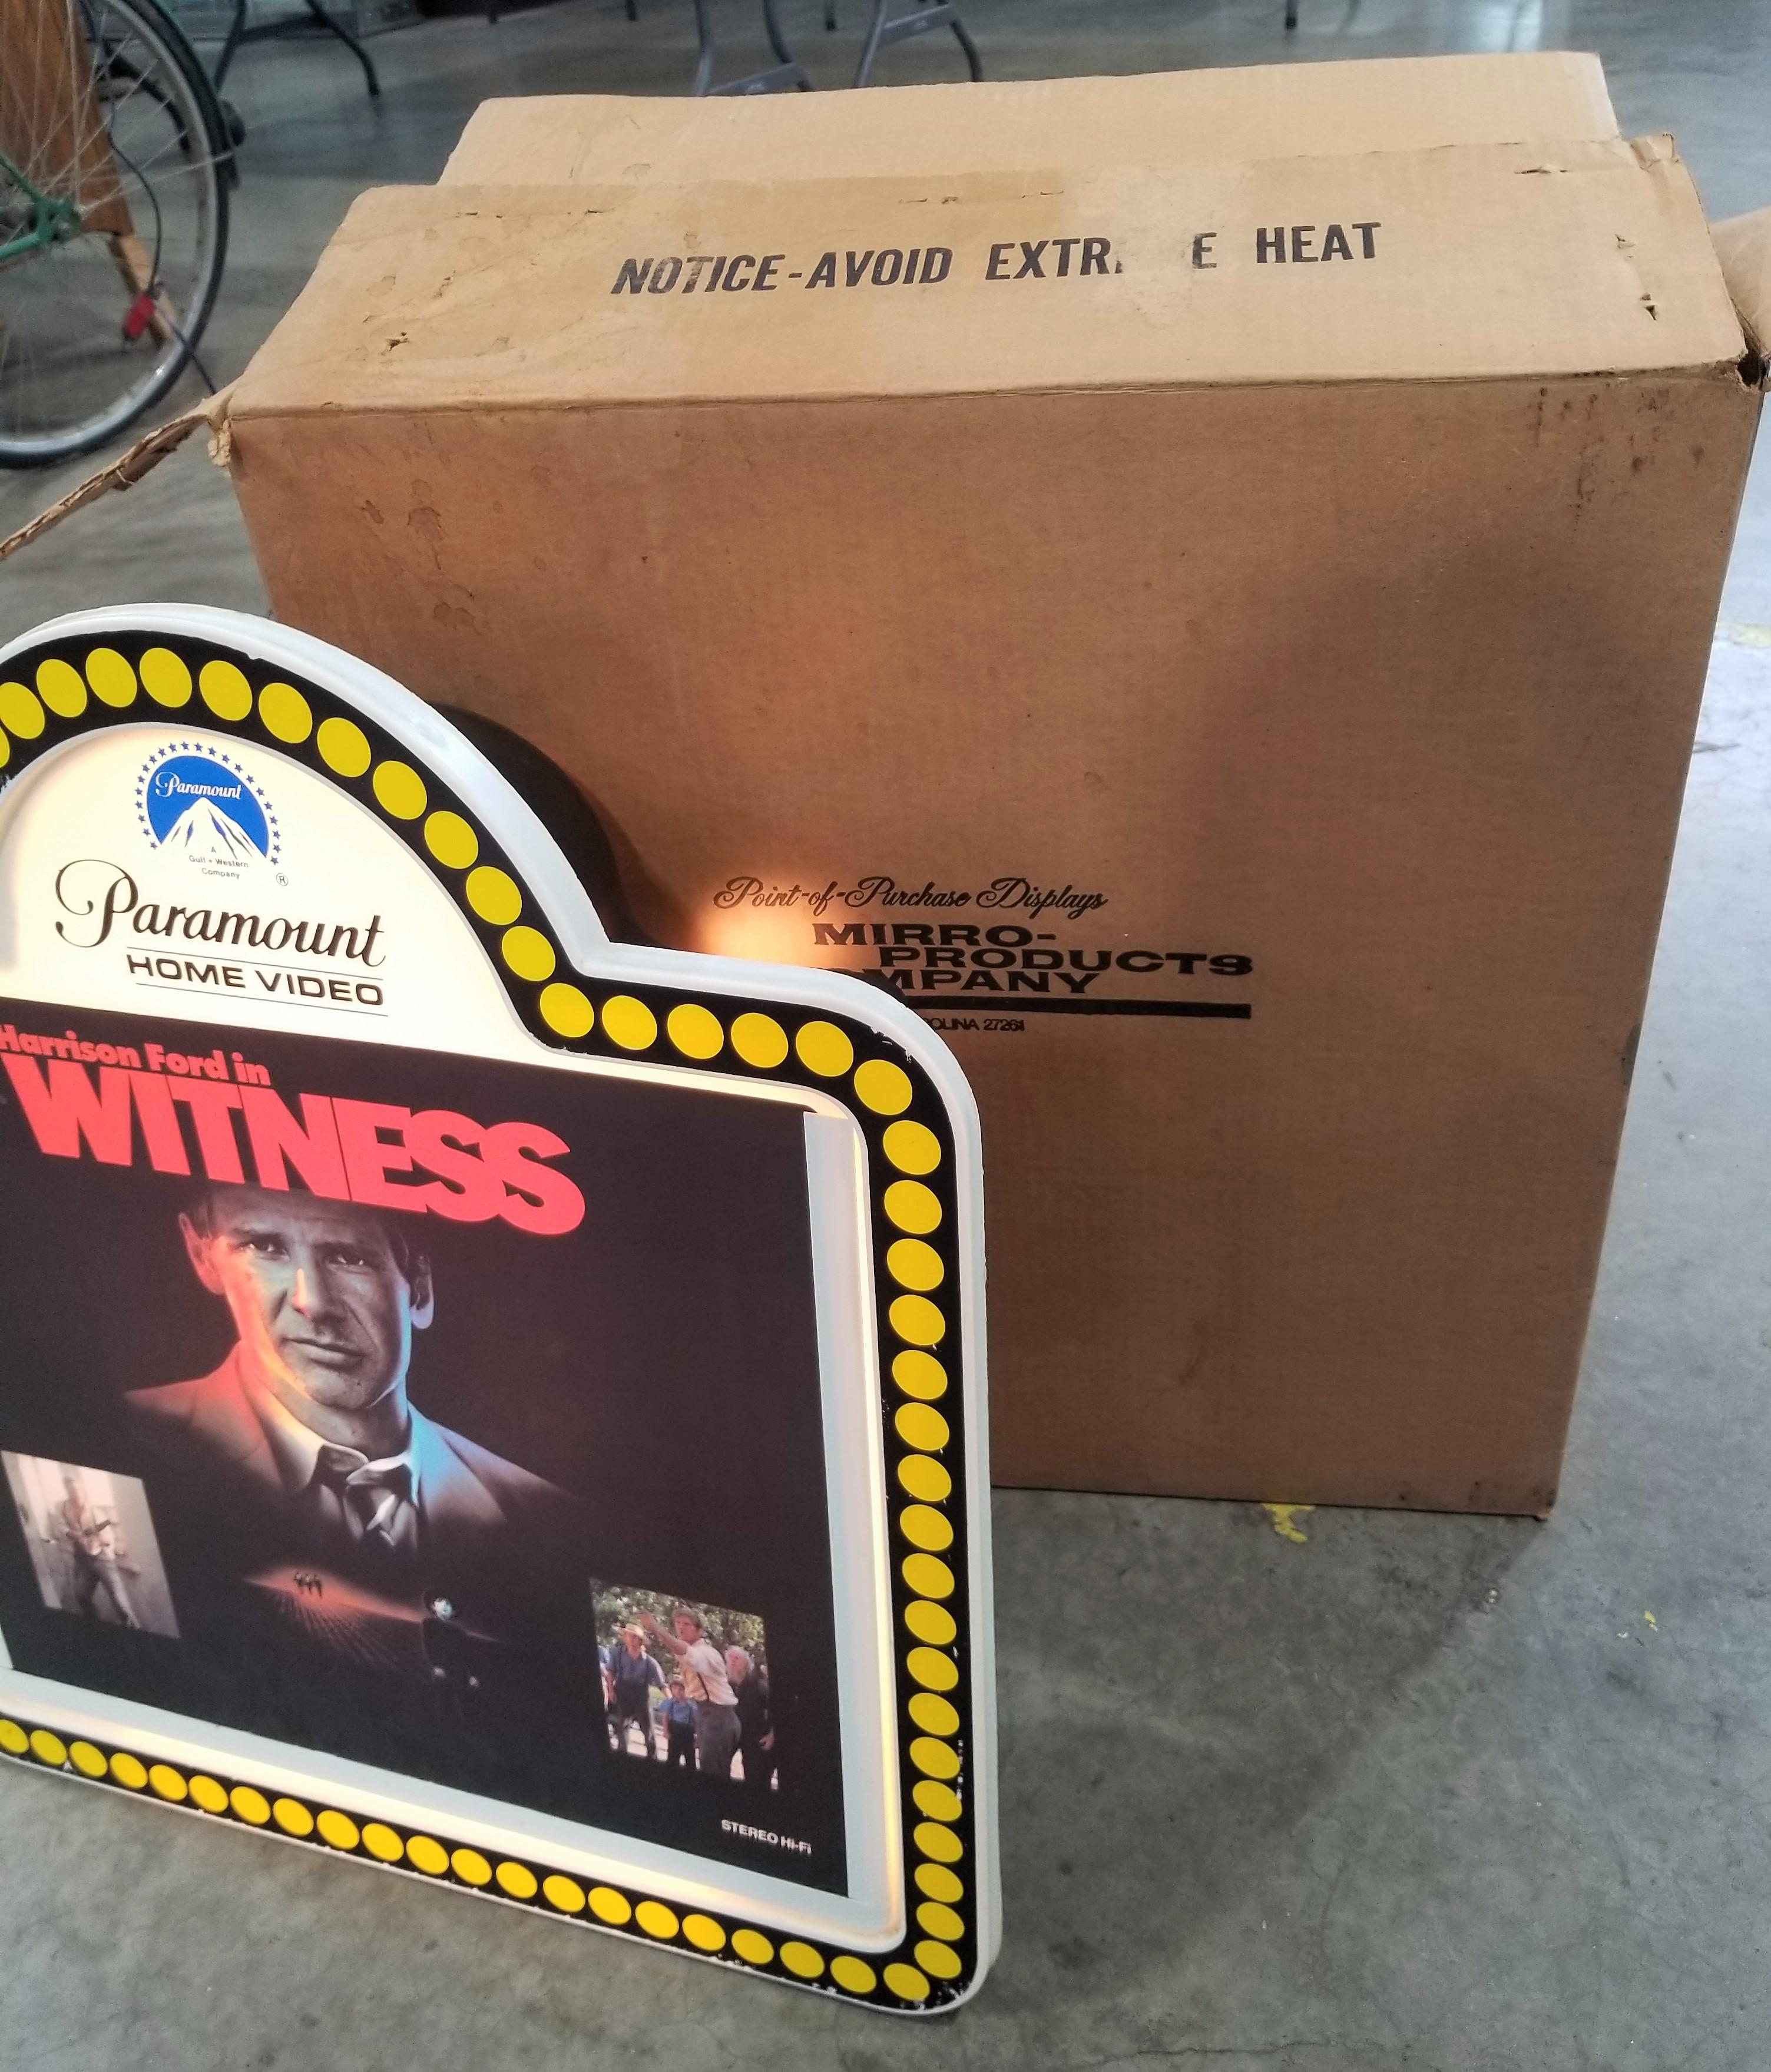 Movie Theater Display Box with "Witness" Insert